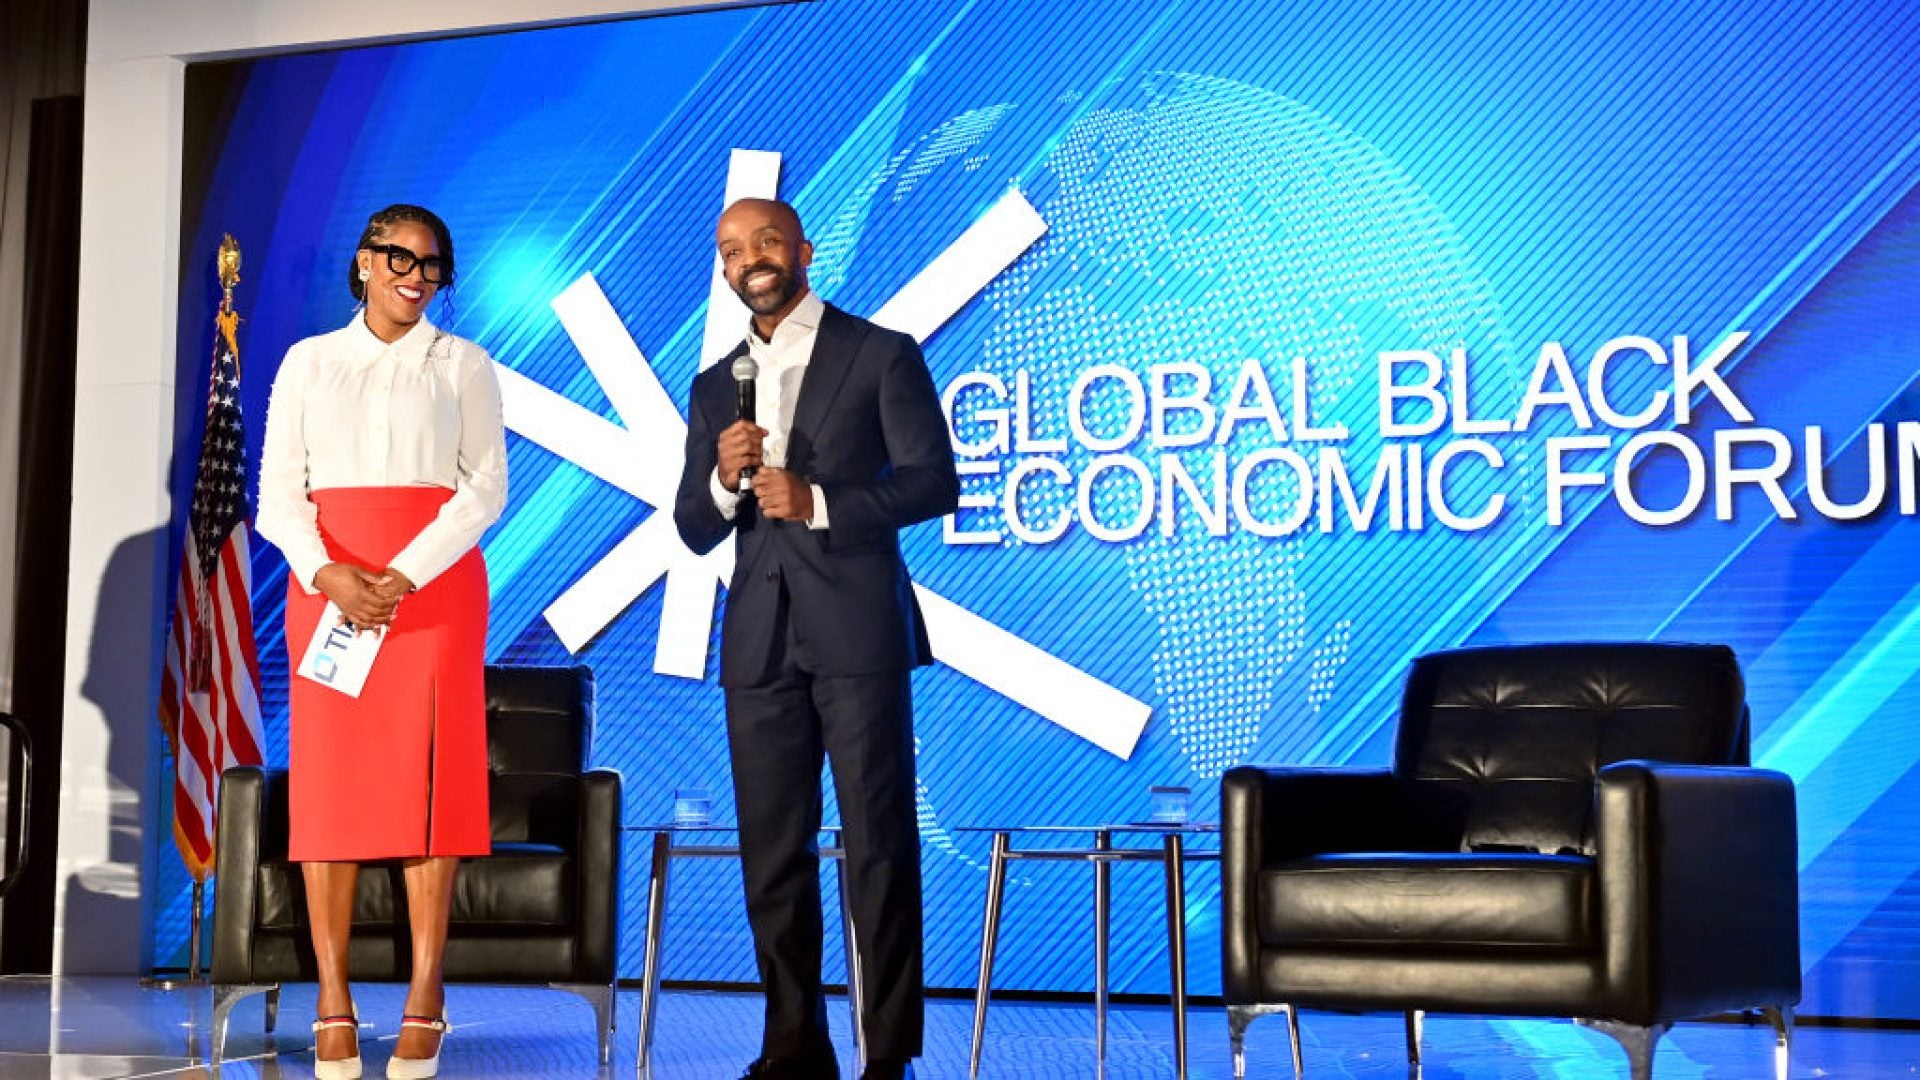 The Global Black Economic Forum And U.S. News Announce New Partnership To Advance Equity And Economic Opportunity